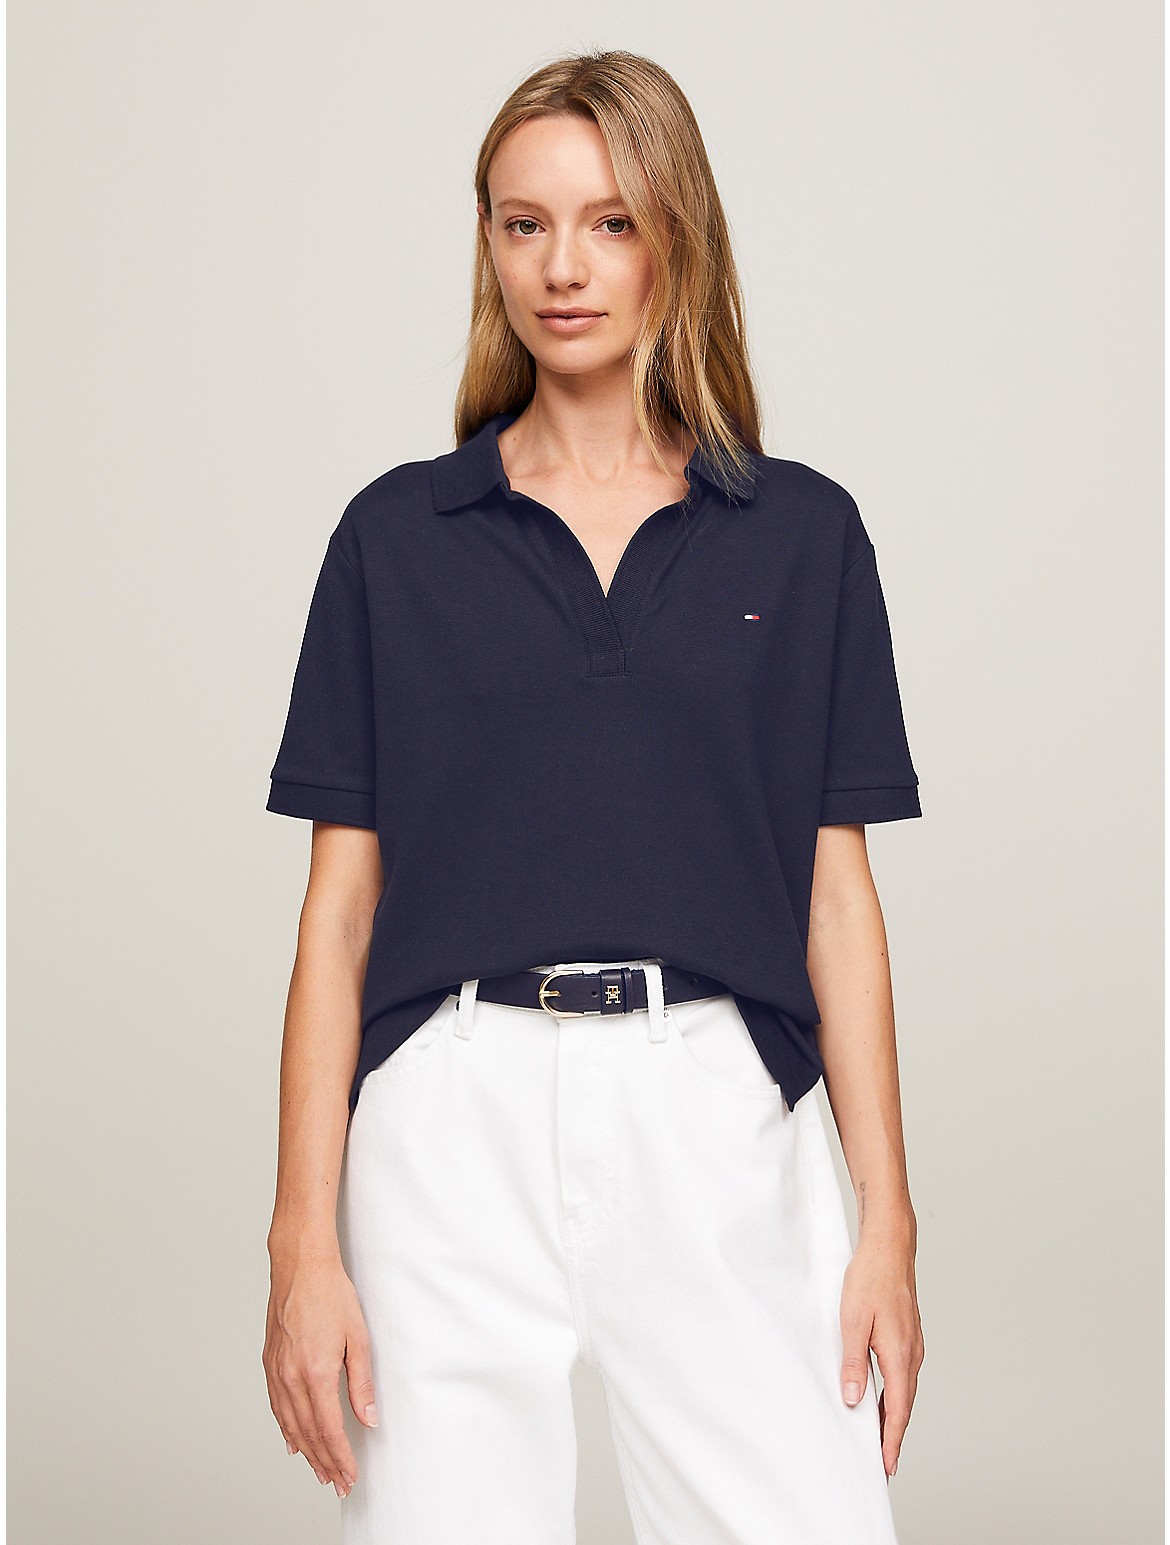 Tommy Hilfiger Women's Relaxed Fit Open Placket Polo